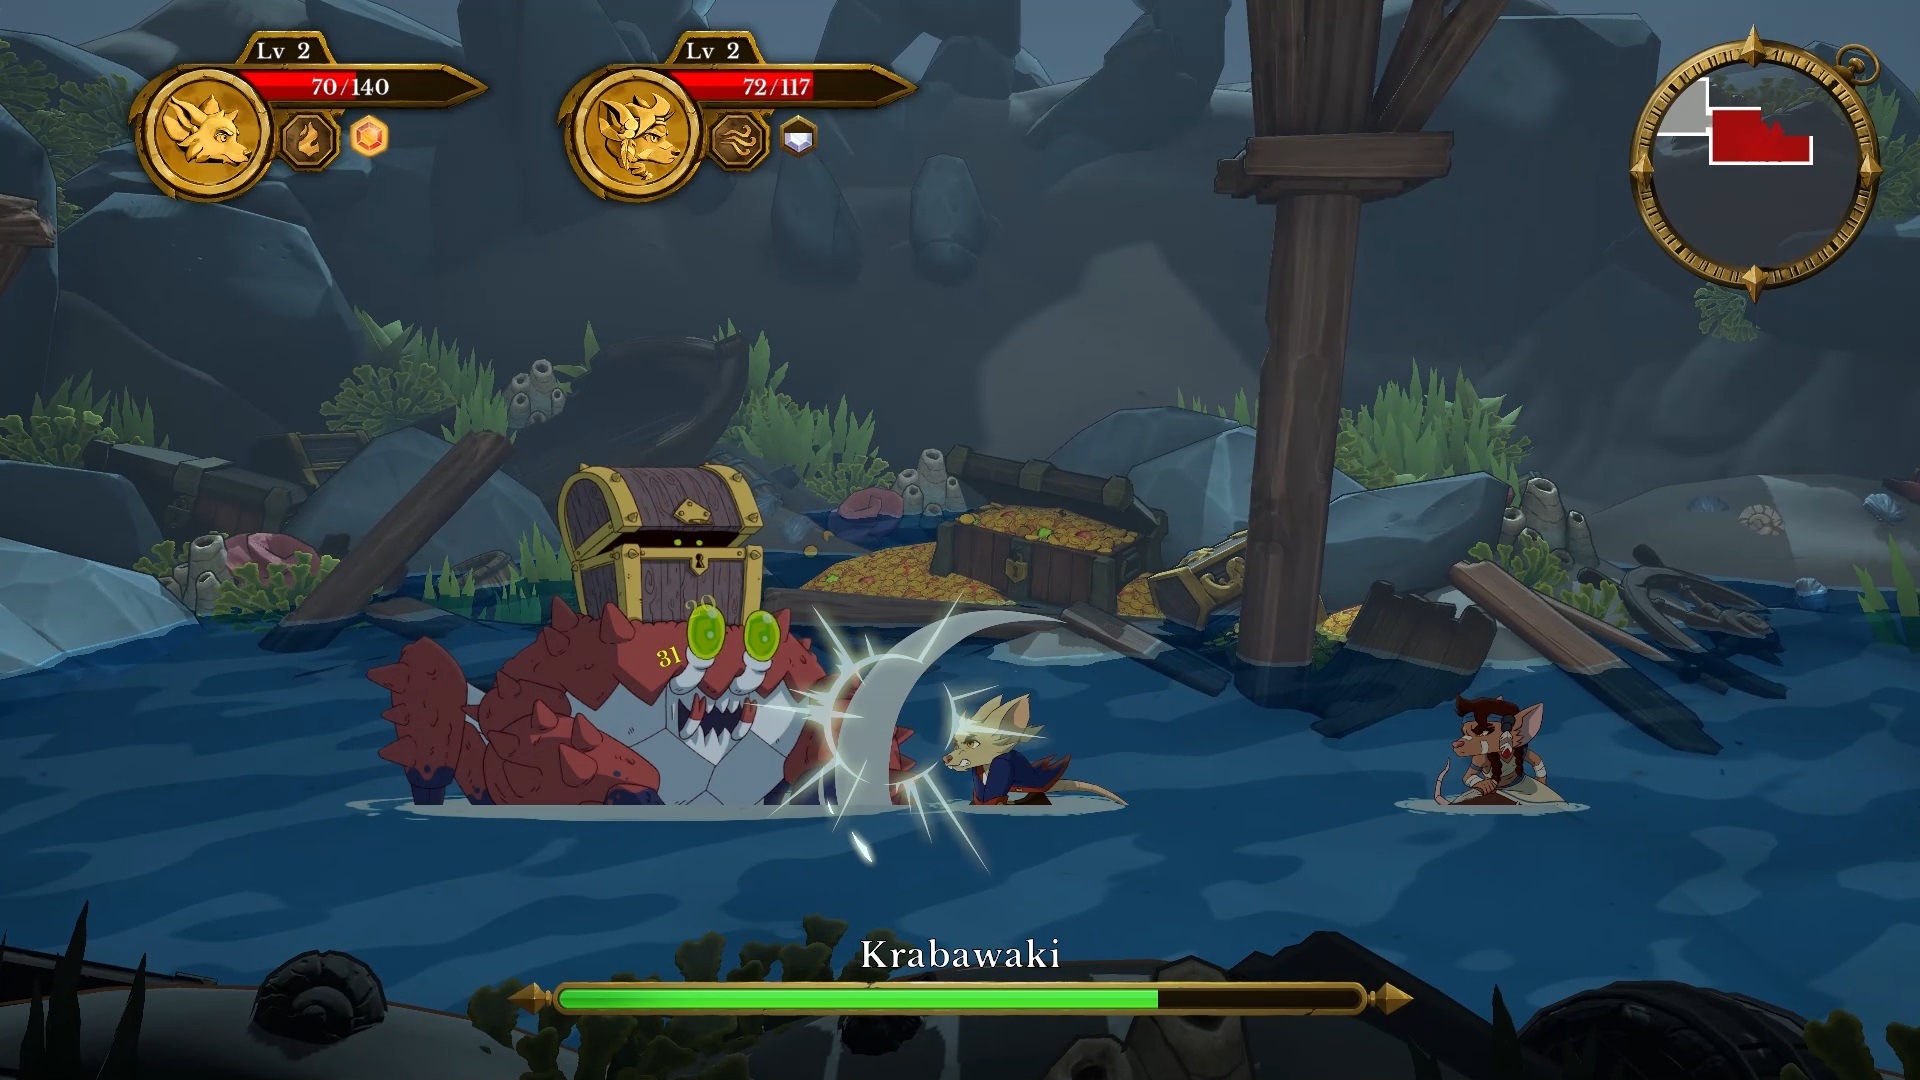 PQube Spielesoftware »Curse of the Sea Rats«, Nintendo Switch